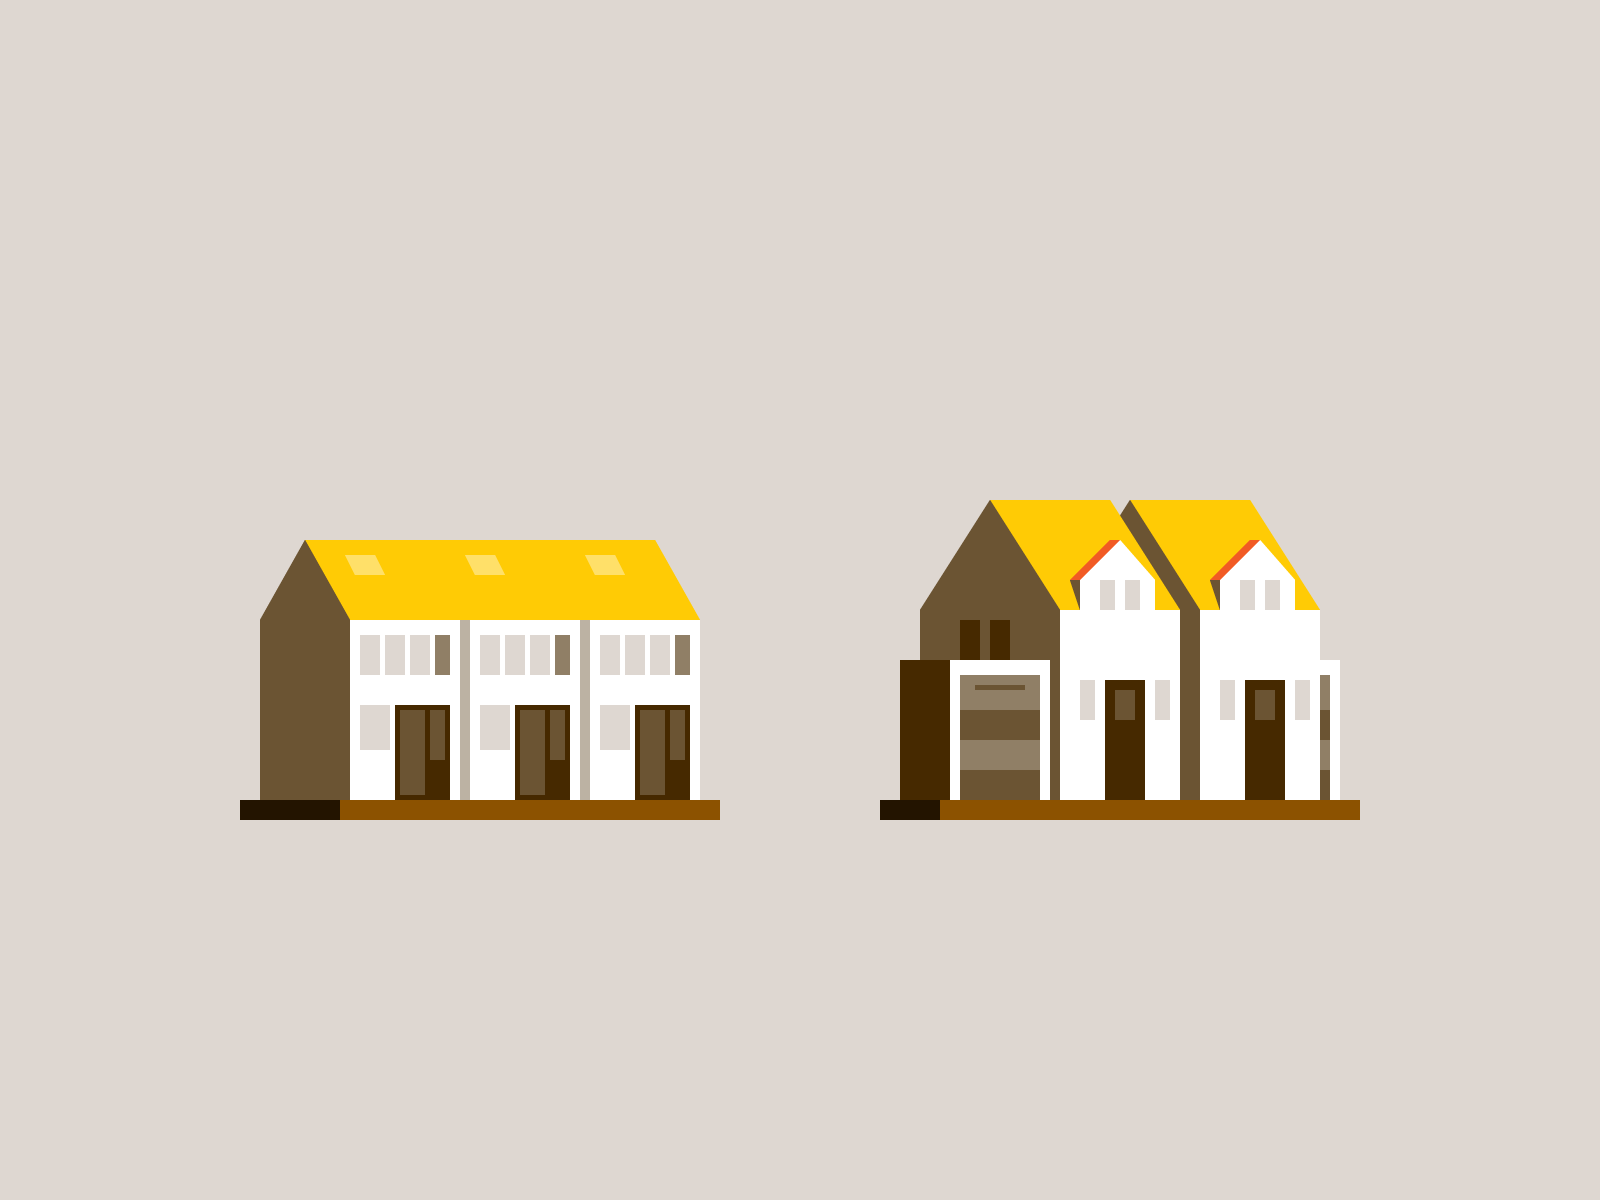 Tiny buildings again building home house icon icon design iconography illustration pictogram property real estate spot icon spot illustration